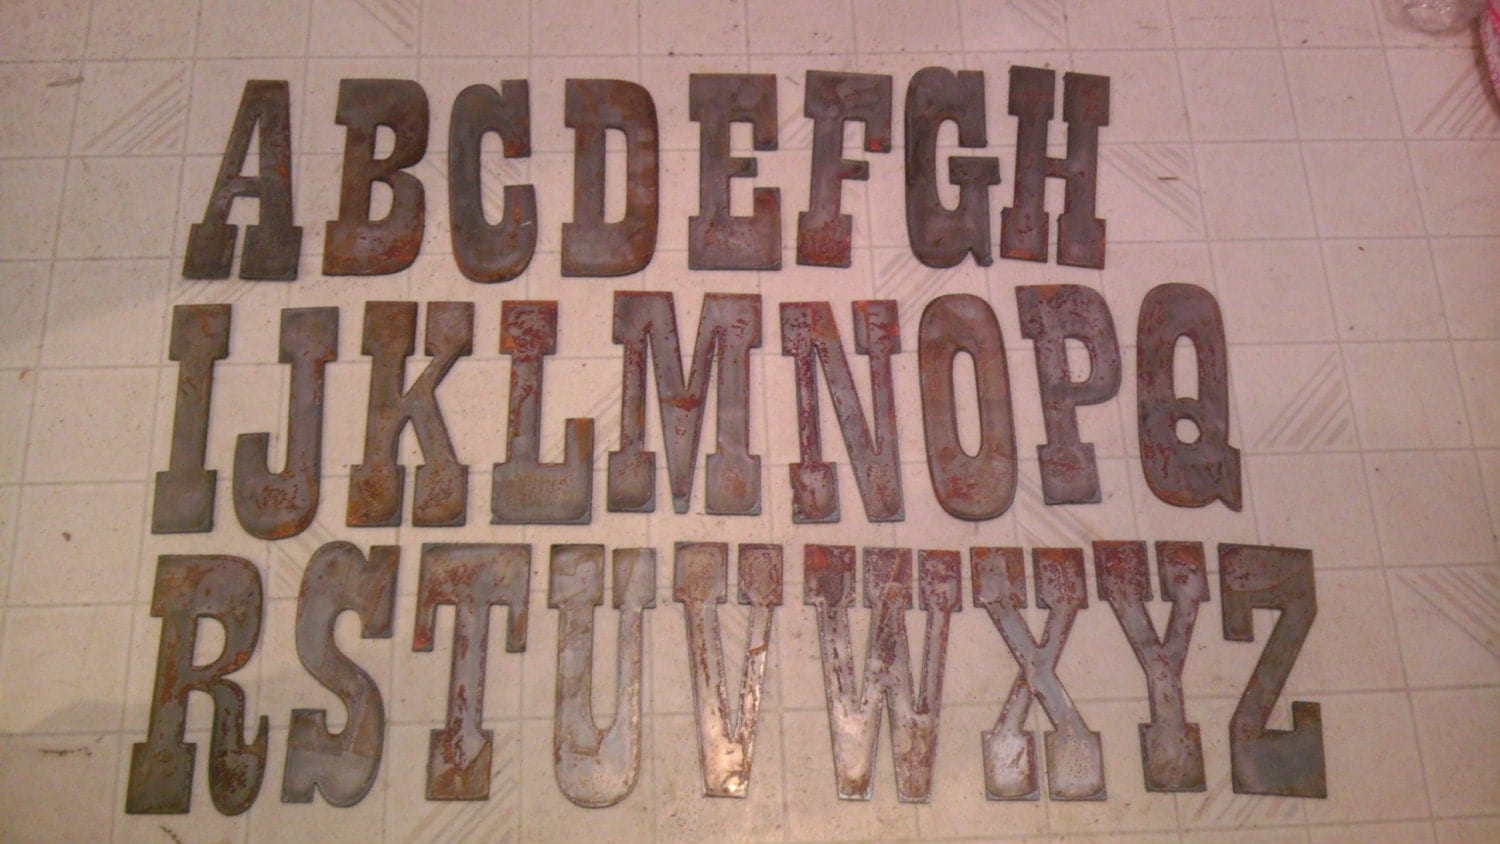 6-inch-letters-alphabet-per-letter-rusty-vintage-western-style